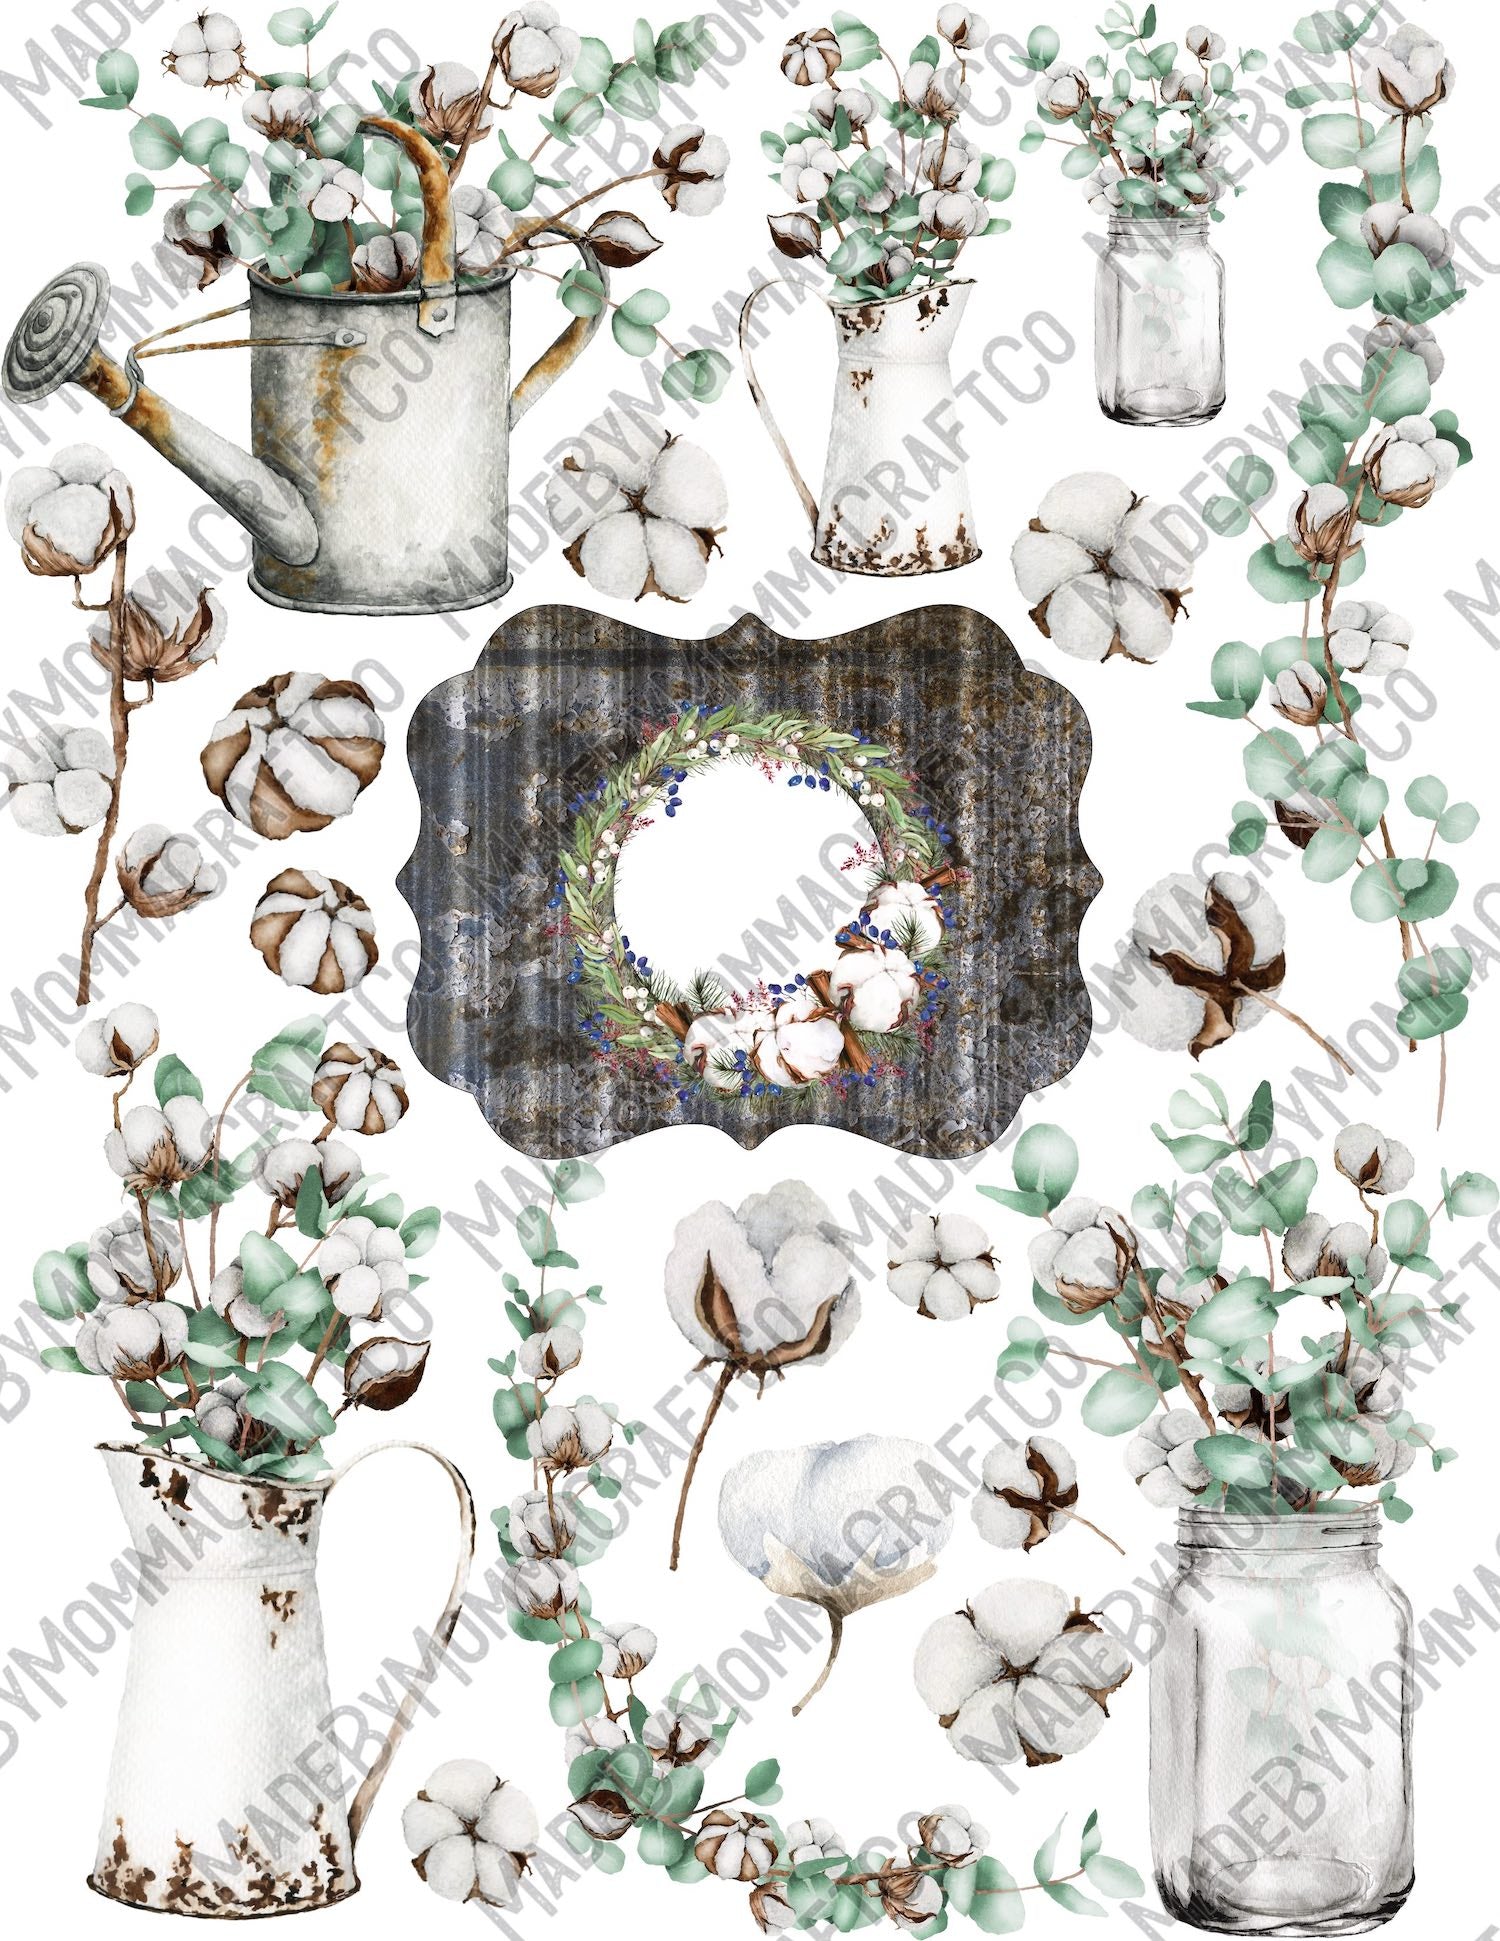 Sage Cotton Jar Floral Sheet Cheat Clear Waterslide ™ Or Sticker The N Made By Momma